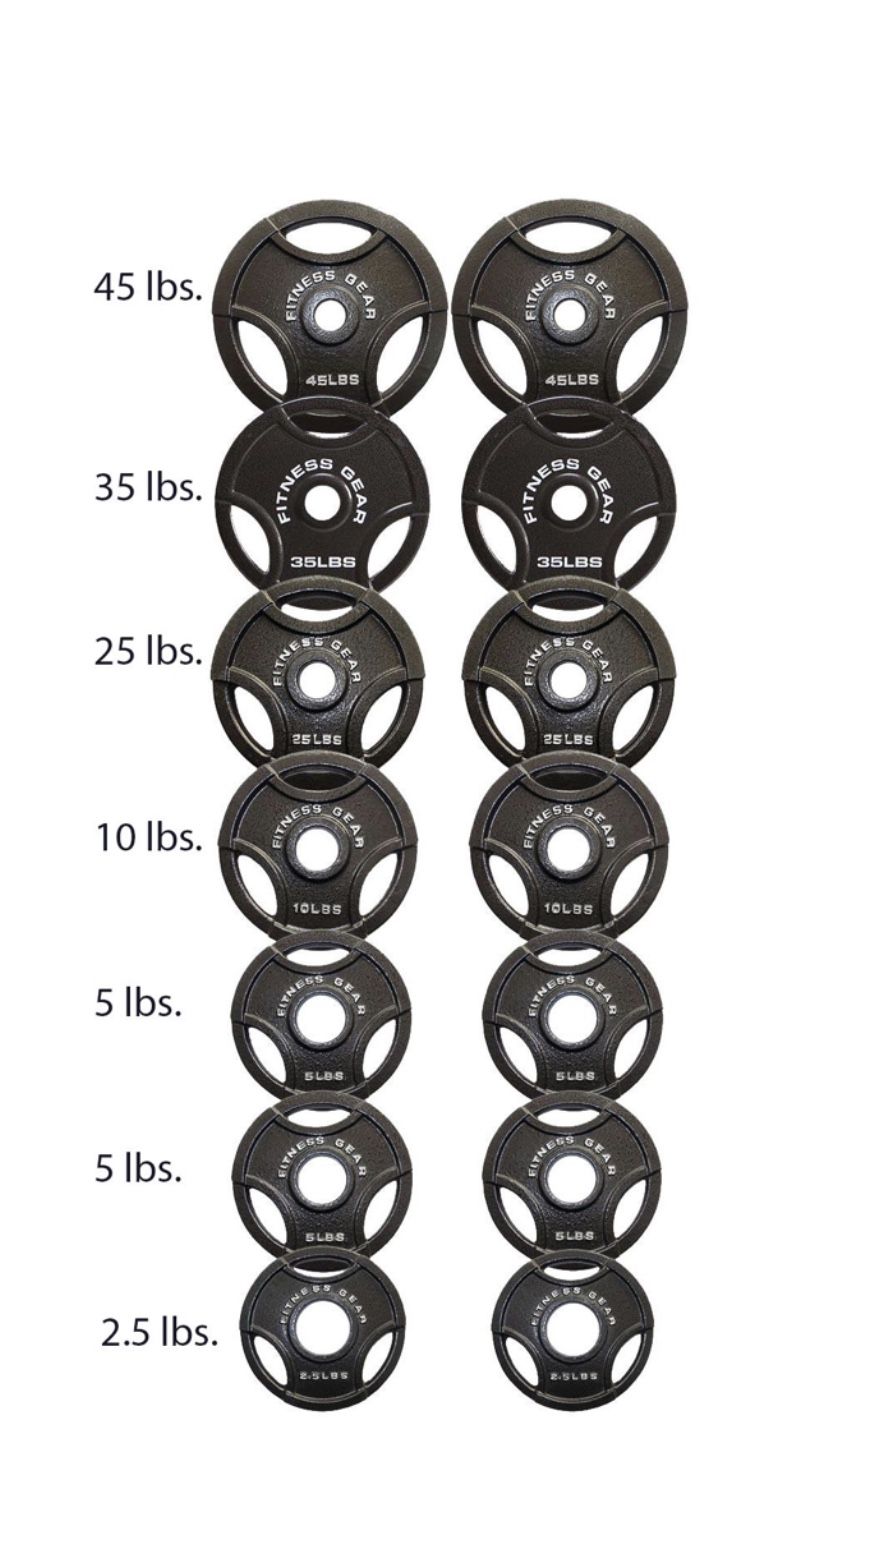 Fitness Gear 255 / 345 lbs Olympic Weight Set - Plates only